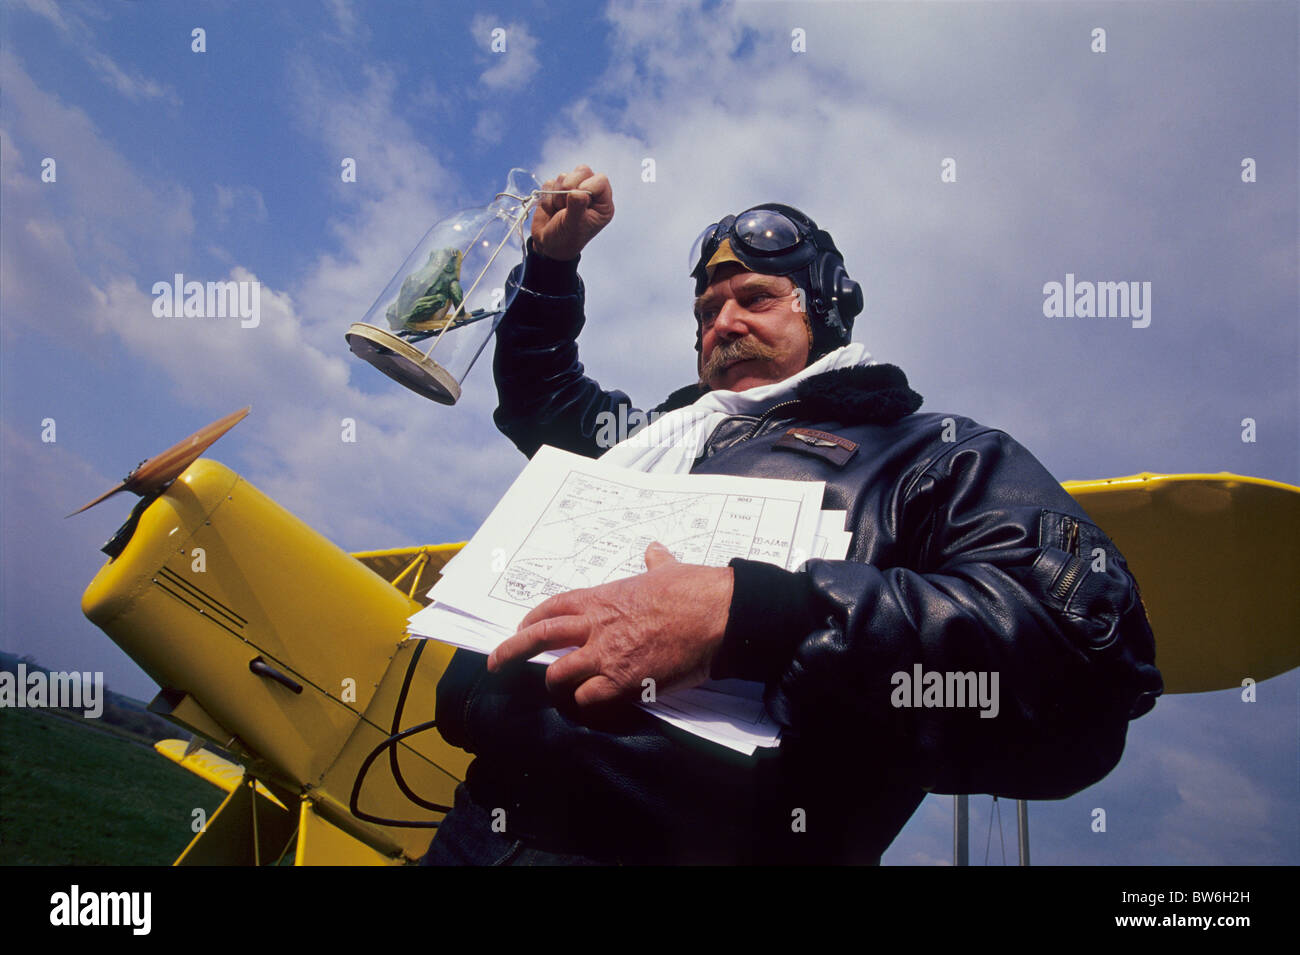 French biplane pilot checking weather forecast with a fake frog climbing a ladder in a jar (old legend for forecast) Stock Photo